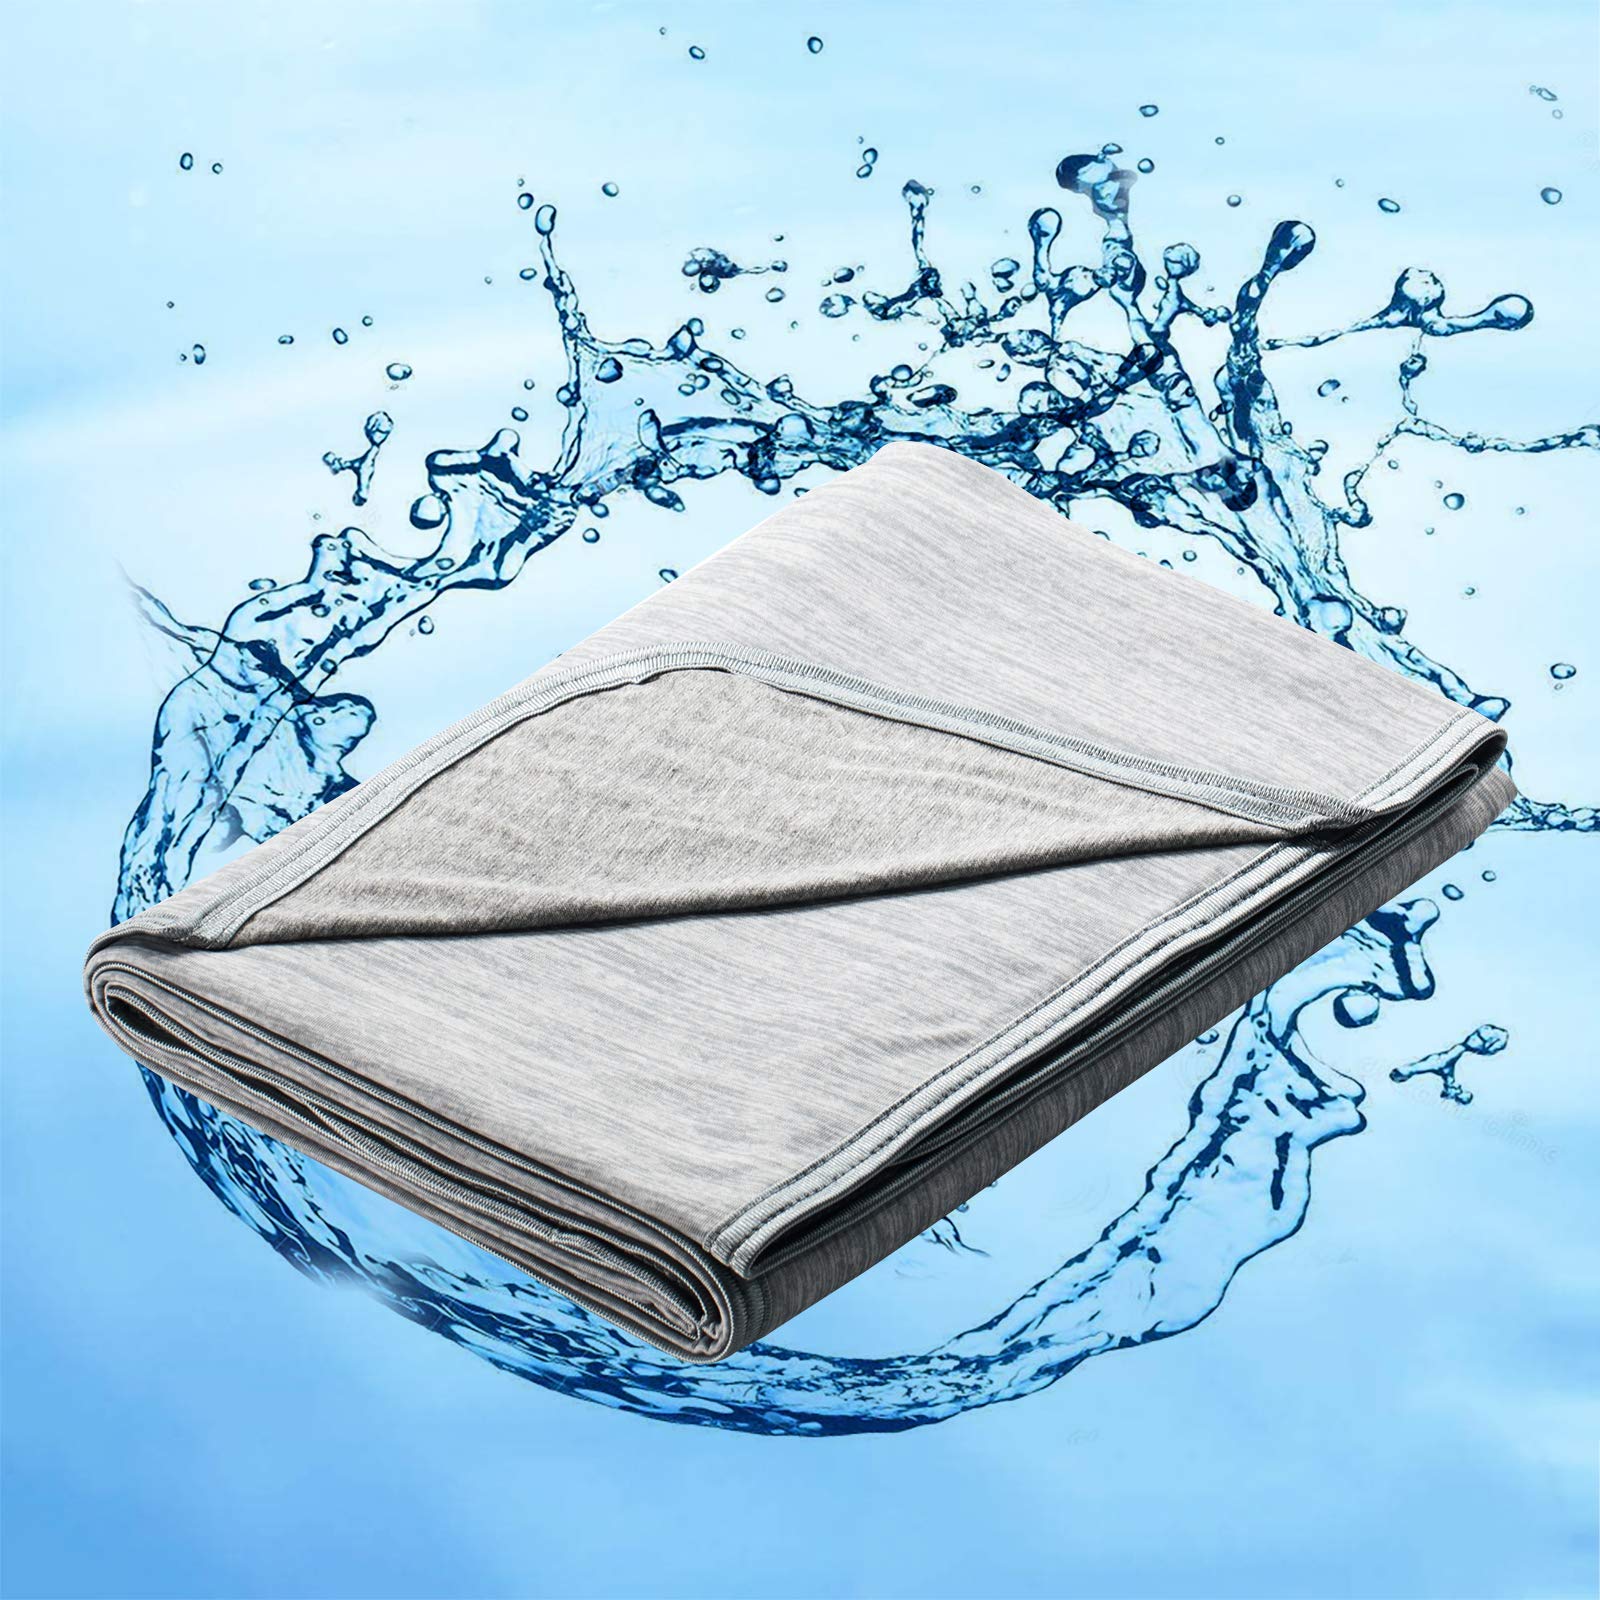 Marchpower Cooling Blanket, Japanese Arc-chill Q-MAX>0.4 Cooling Fiber Summer Blankets, Double-sided Lightweight Cool Blanket Absorb Heat for Night Sweats Breathable and Skin-friendly - 200x220cm,Grey